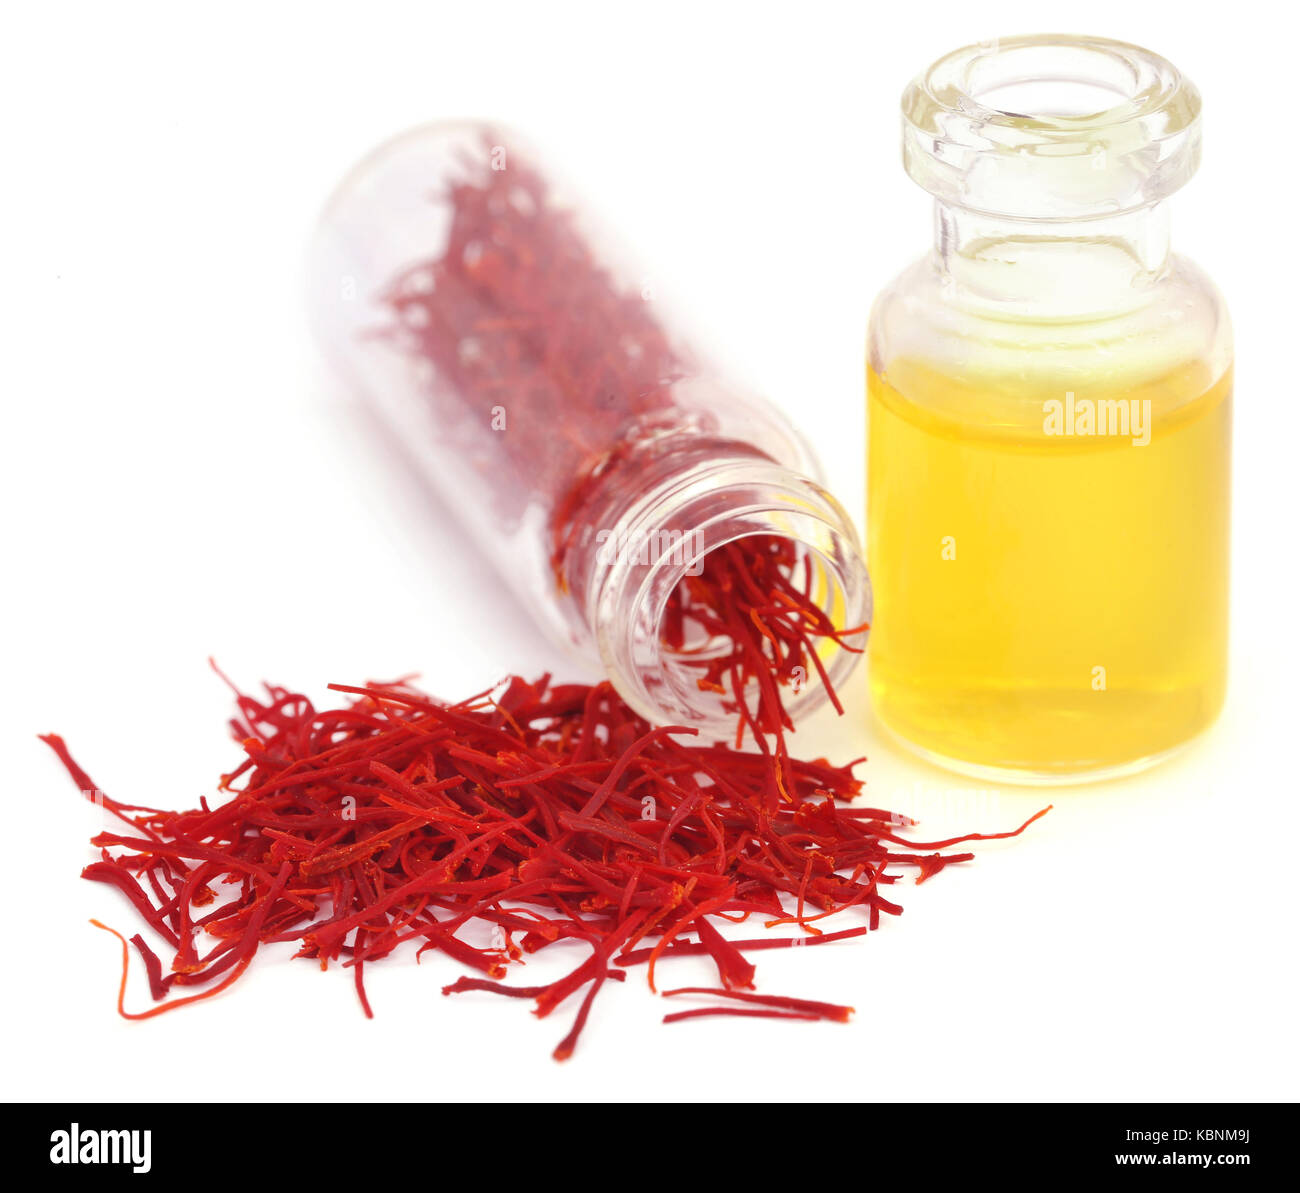 Closeup of Saffron used as food additive over white background Stock Photo